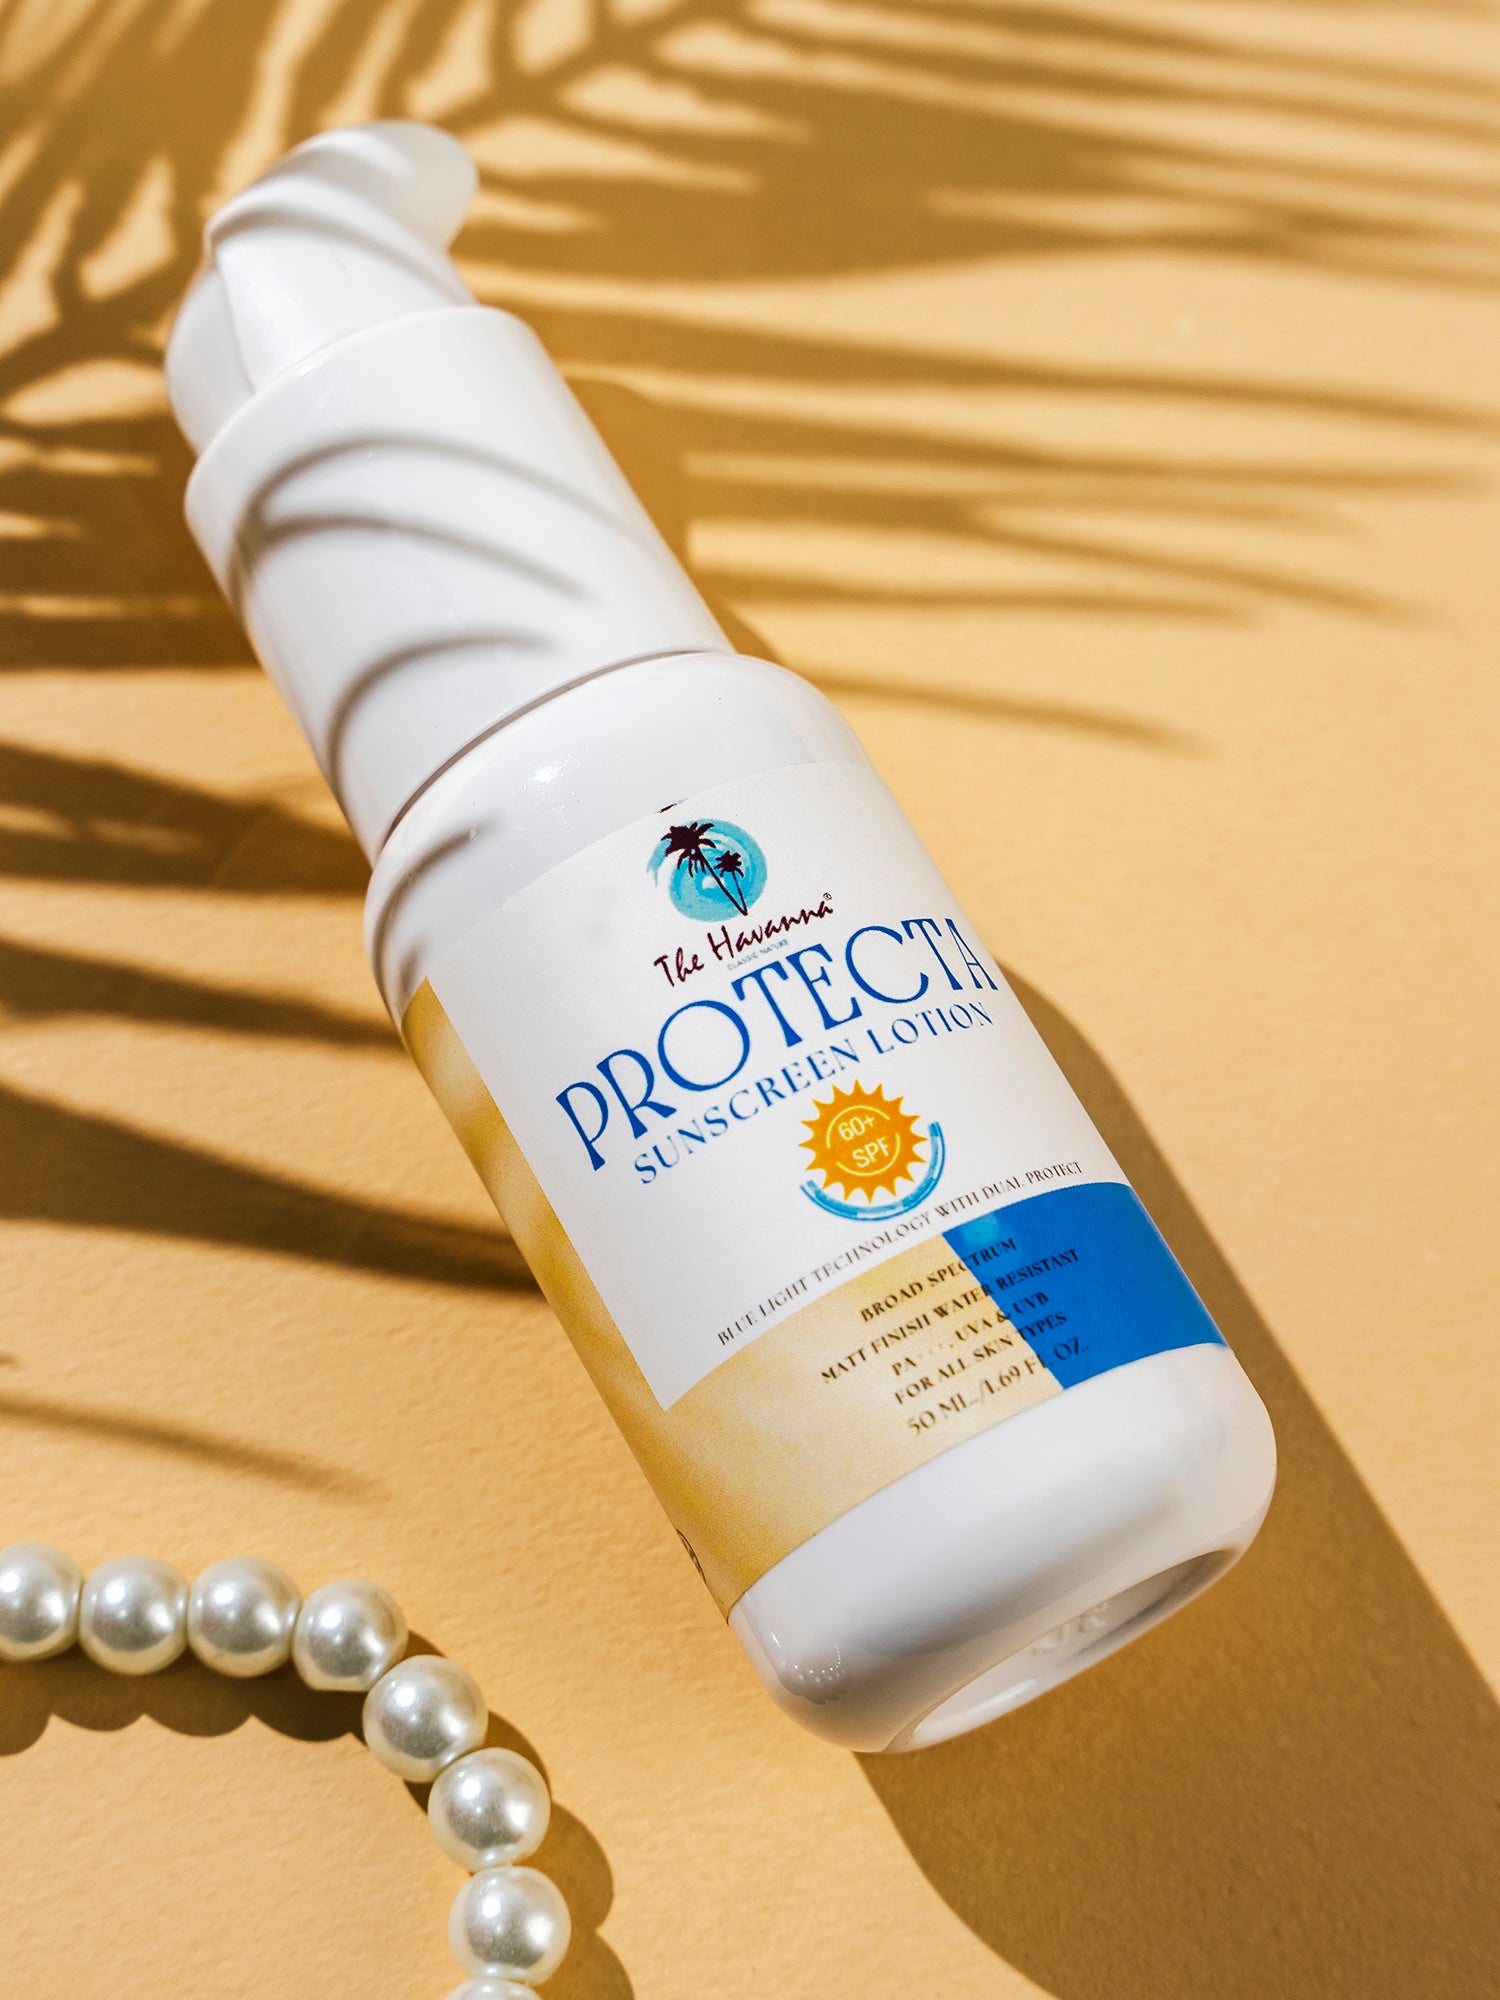 BLUE LIGHT TECHNOLOGY WITH DUAL PROTECTA SUNSCREEN LOTION 60+ SPF-The Havanna Classic Nature